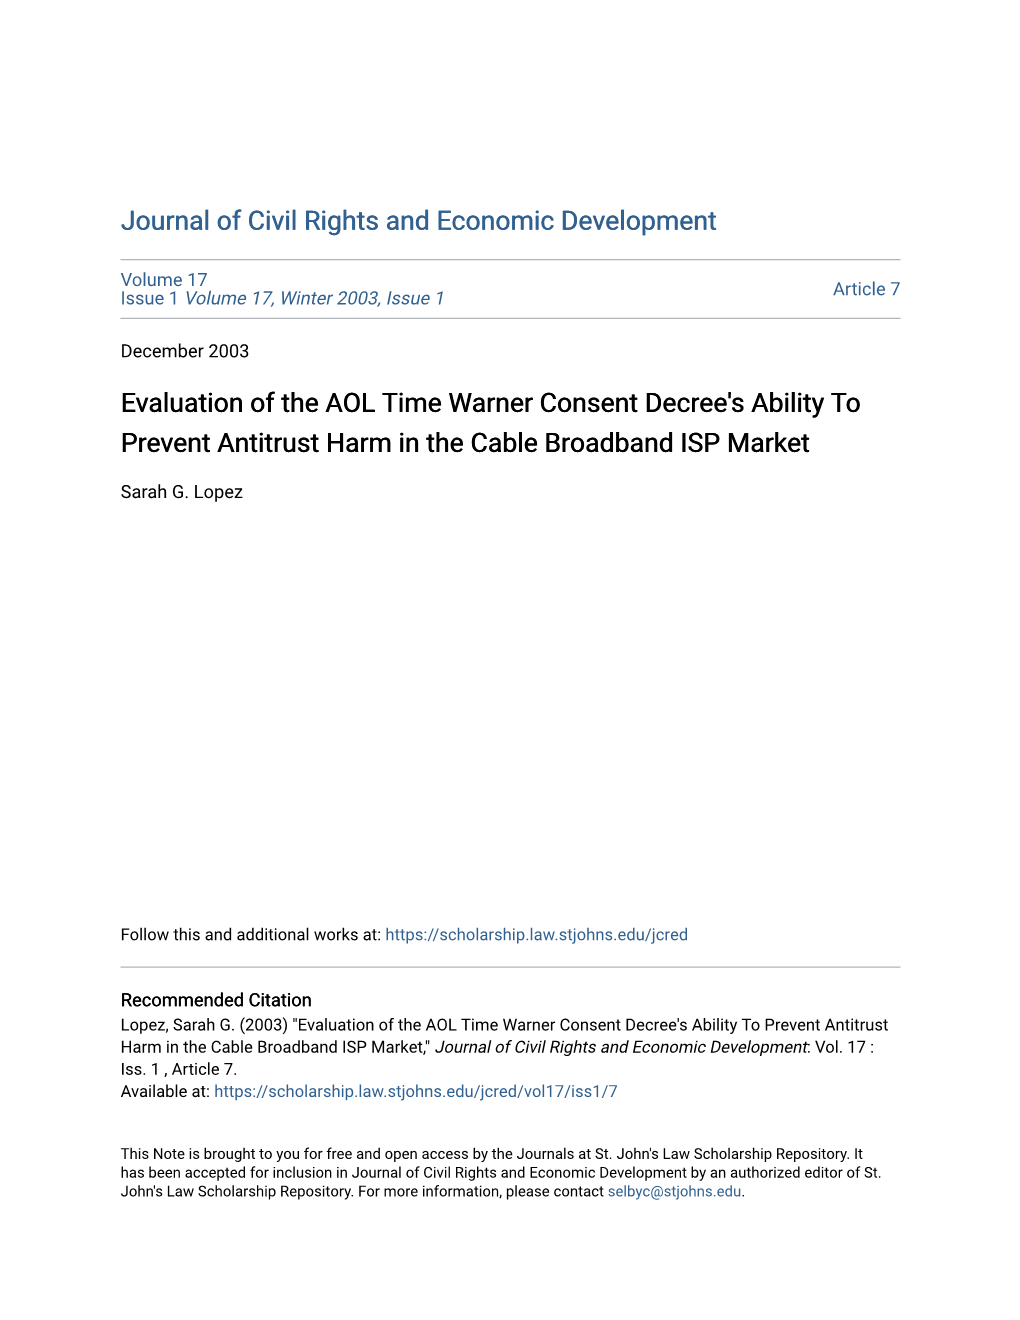 Evaluation of the AOL Time Warner Consent Decree's Ability to Prevent Antitrust Harm in the Cable Broadband ISP Market